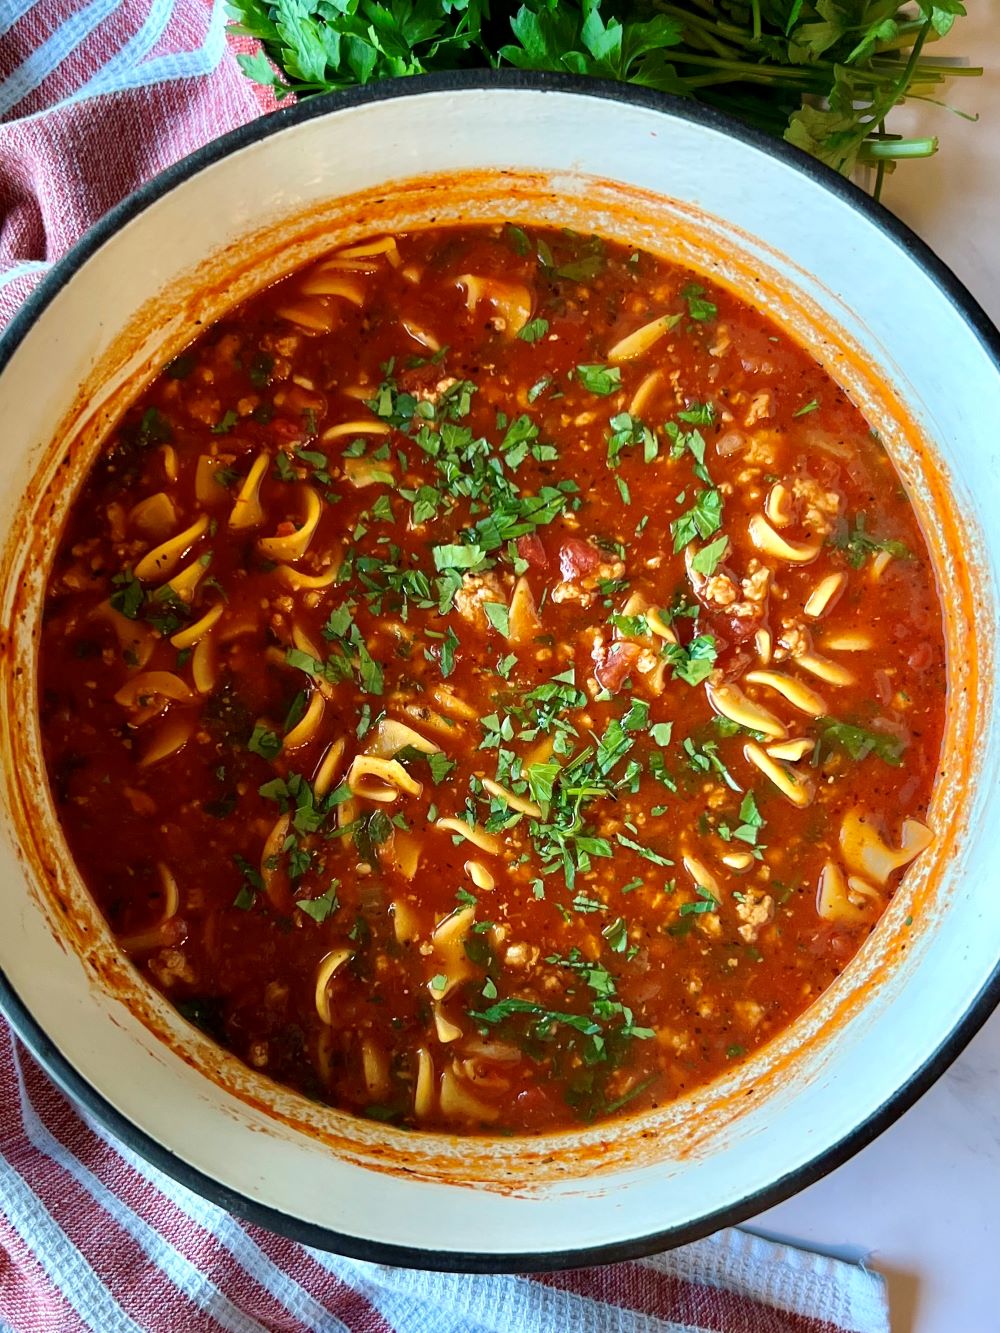 Pot with noodles and meat sauce